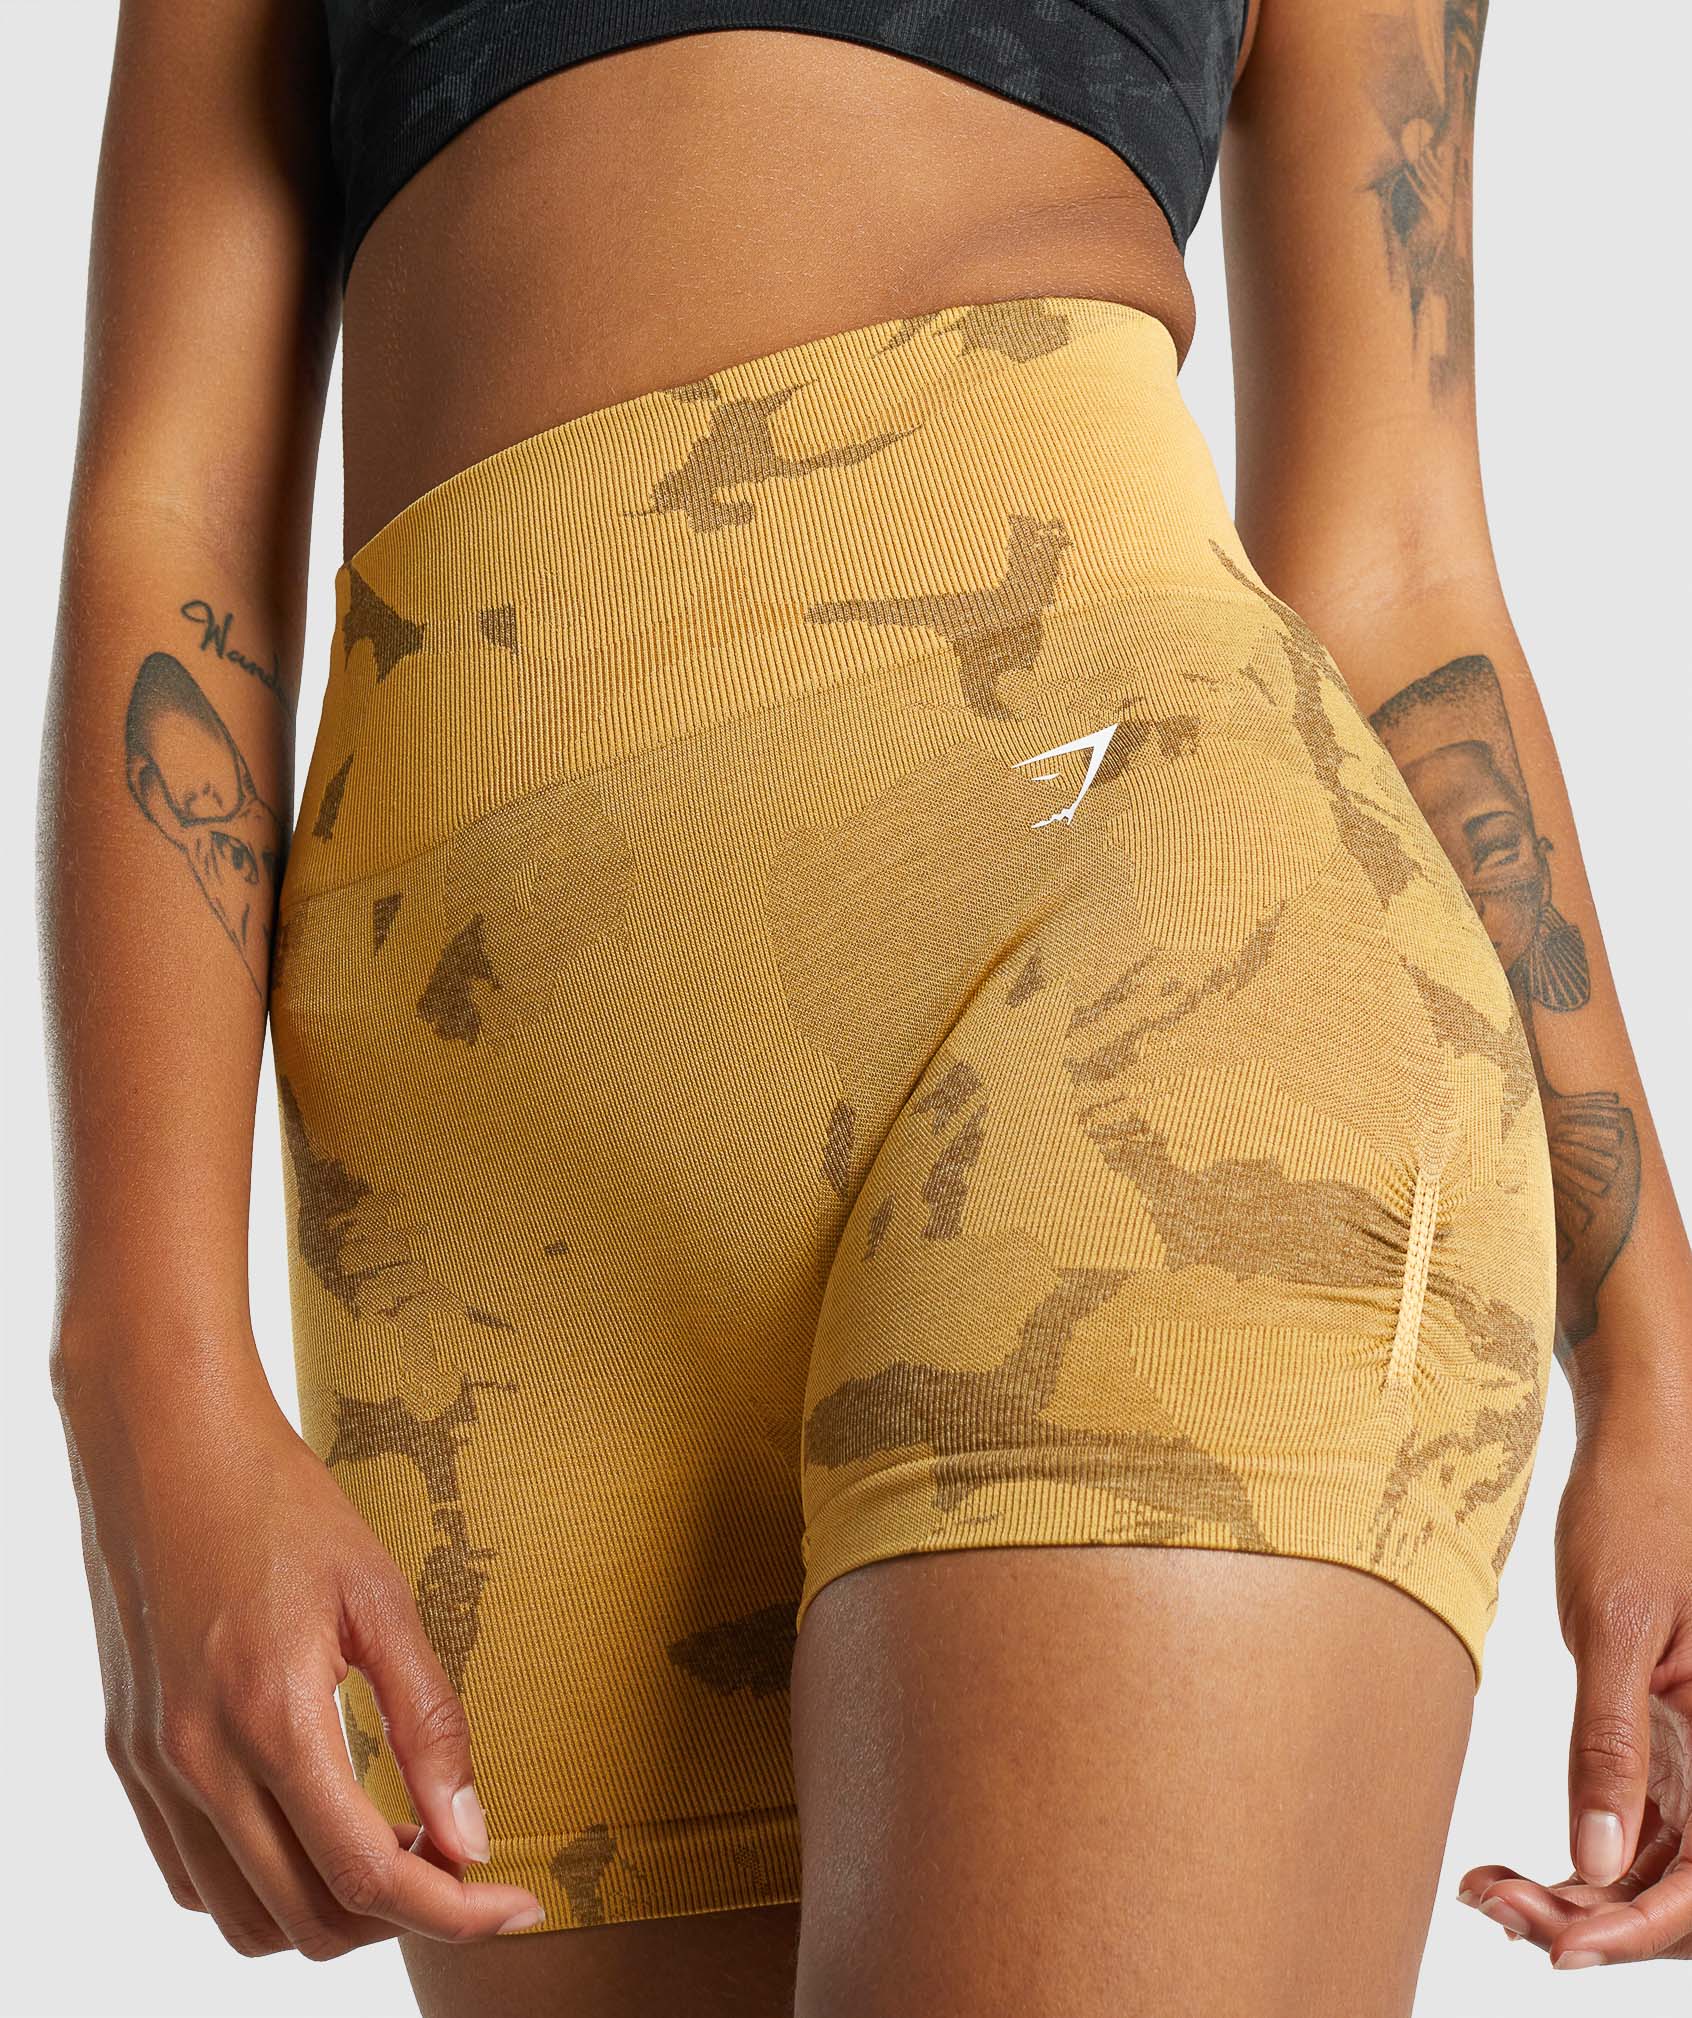 Gymshark New Camo Leggings S Yellow - $48 New With Tags - From Adrianna